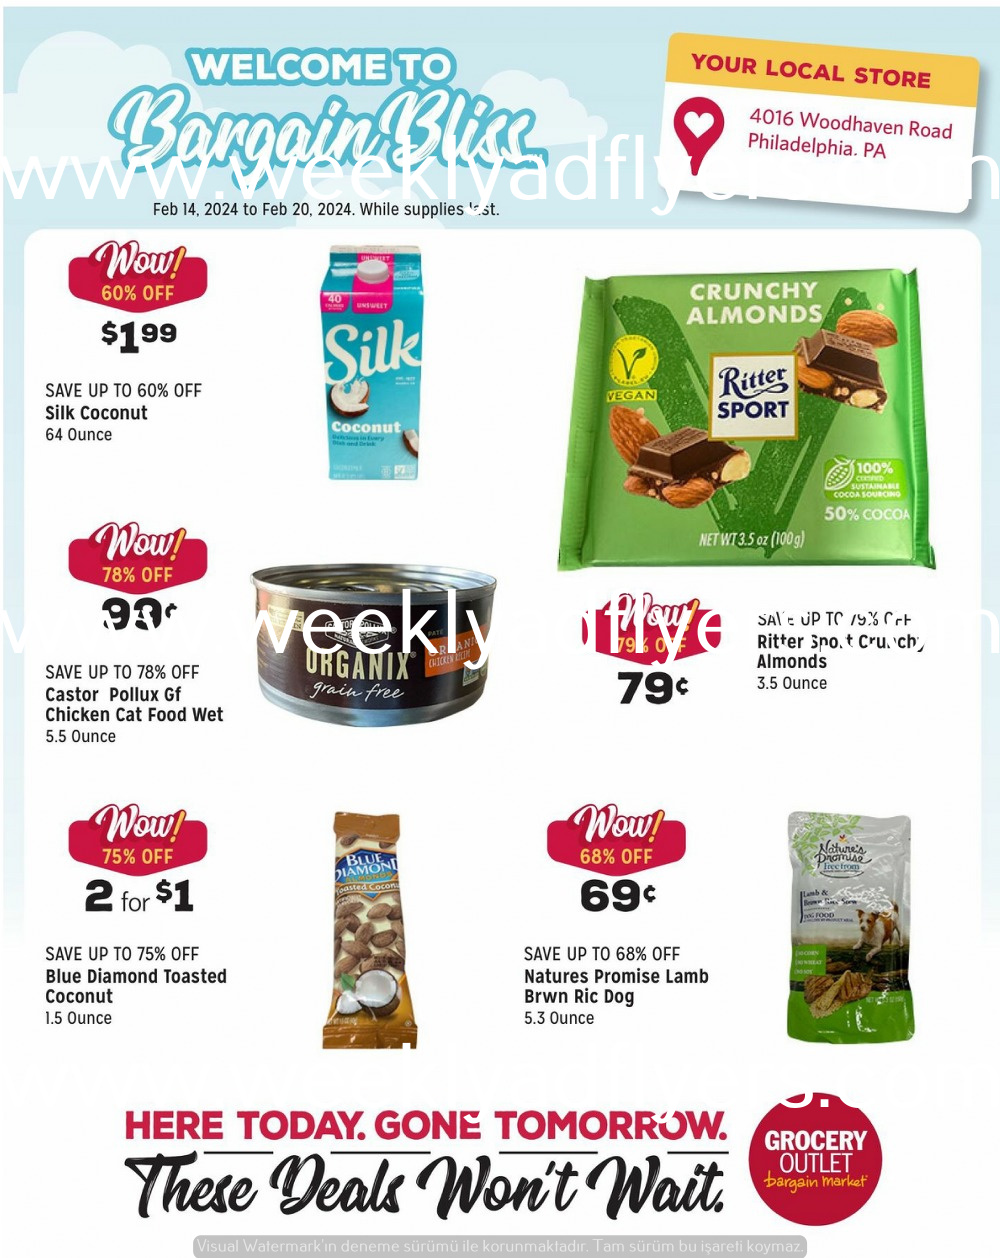 Grocery Outlet Weekly Ad February 28 to March 5 2024 1 – grocery outlet ad 2 1